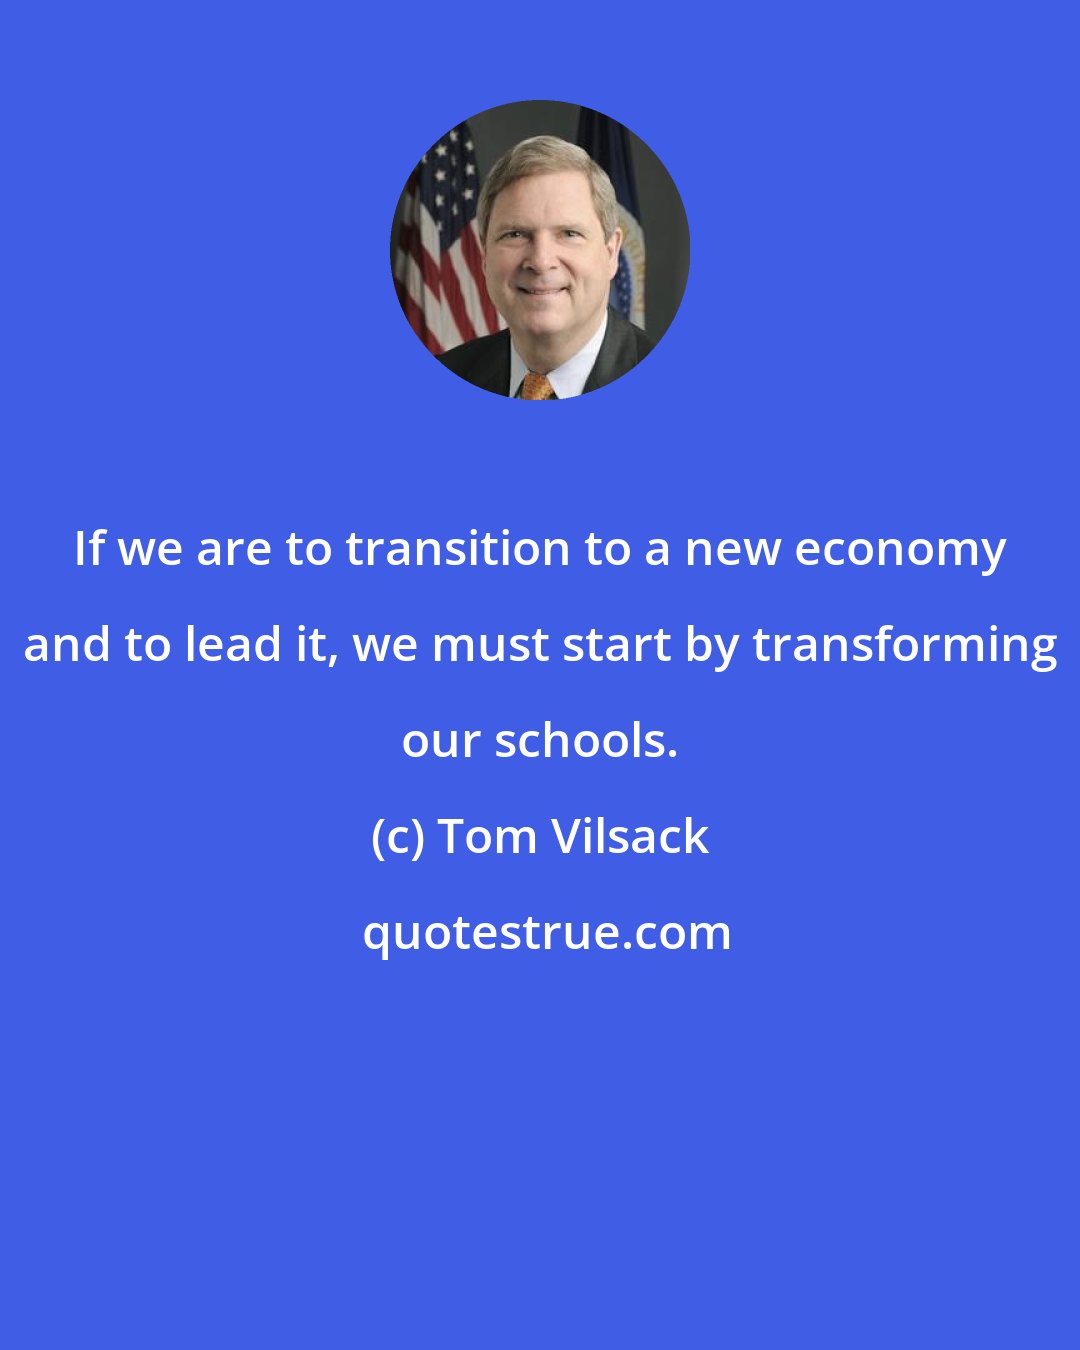 Tom Vilsack: If we are to transition to a new economy and to lead it, we must start by transforming our schools.